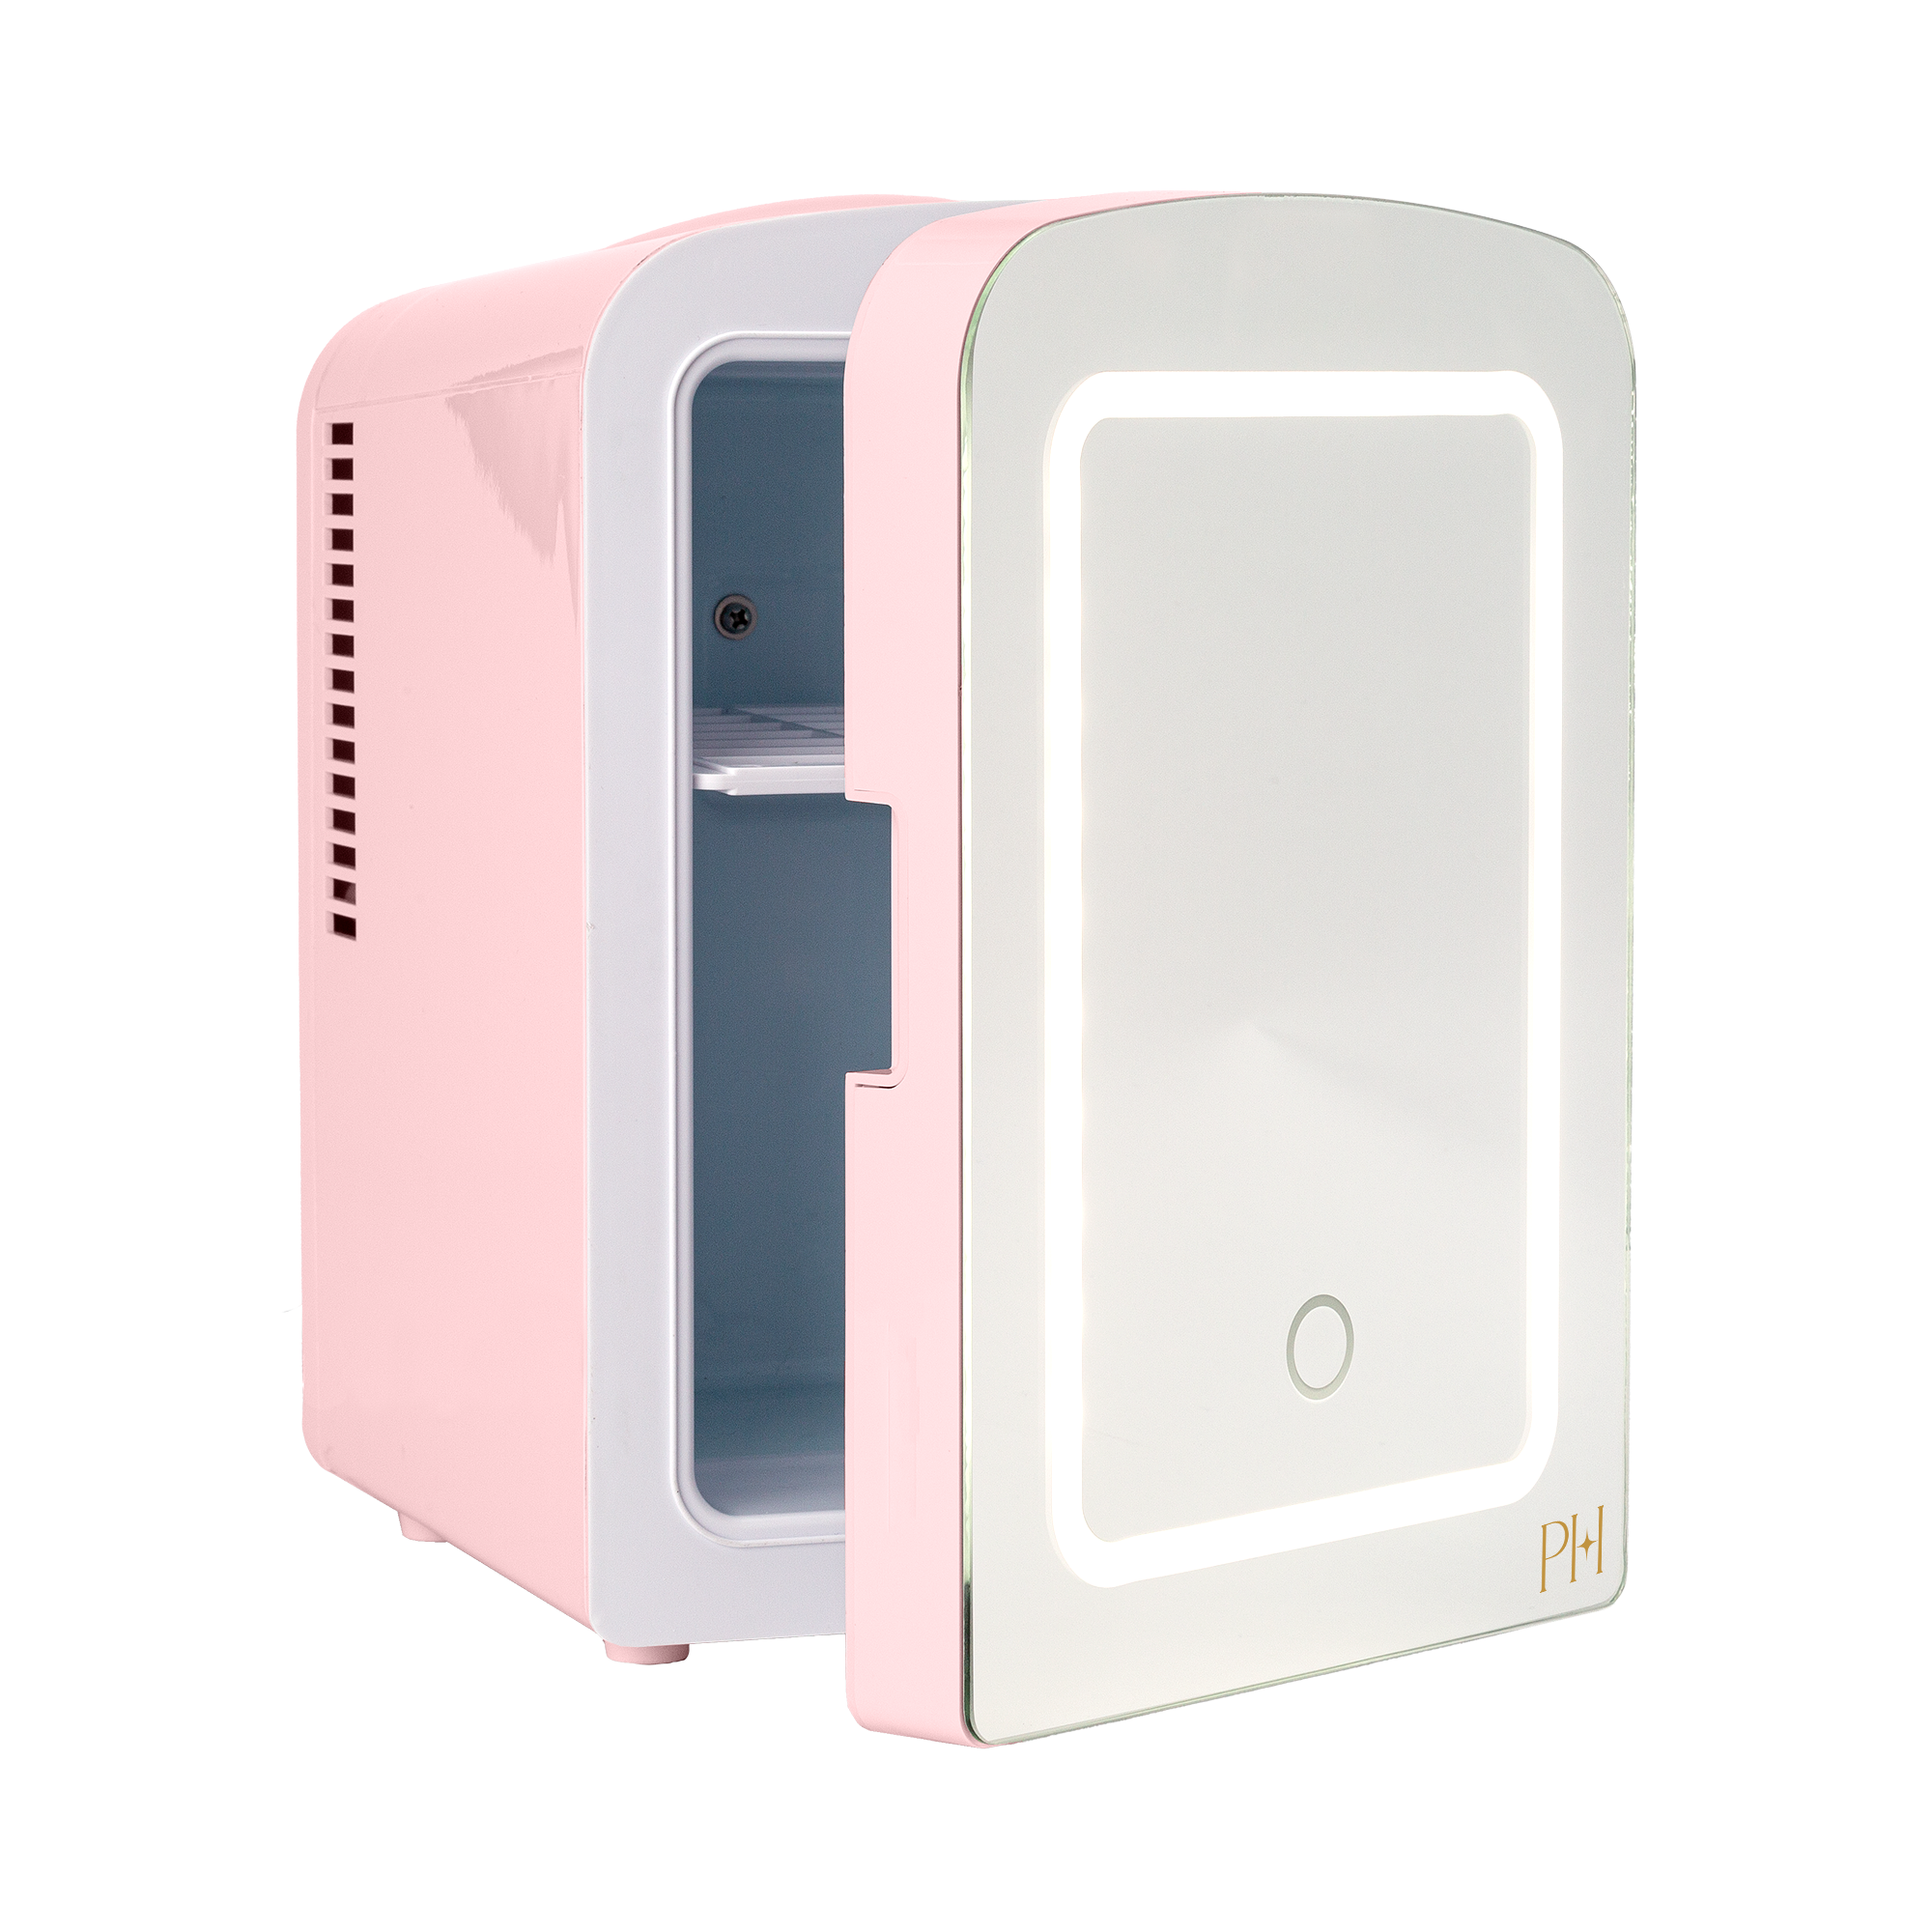 Paris Hilton Mini Refrigerator and Personal Beauty Fridge, Mirrored Door with Light, 4 Liter, Pink - image 1 of 9